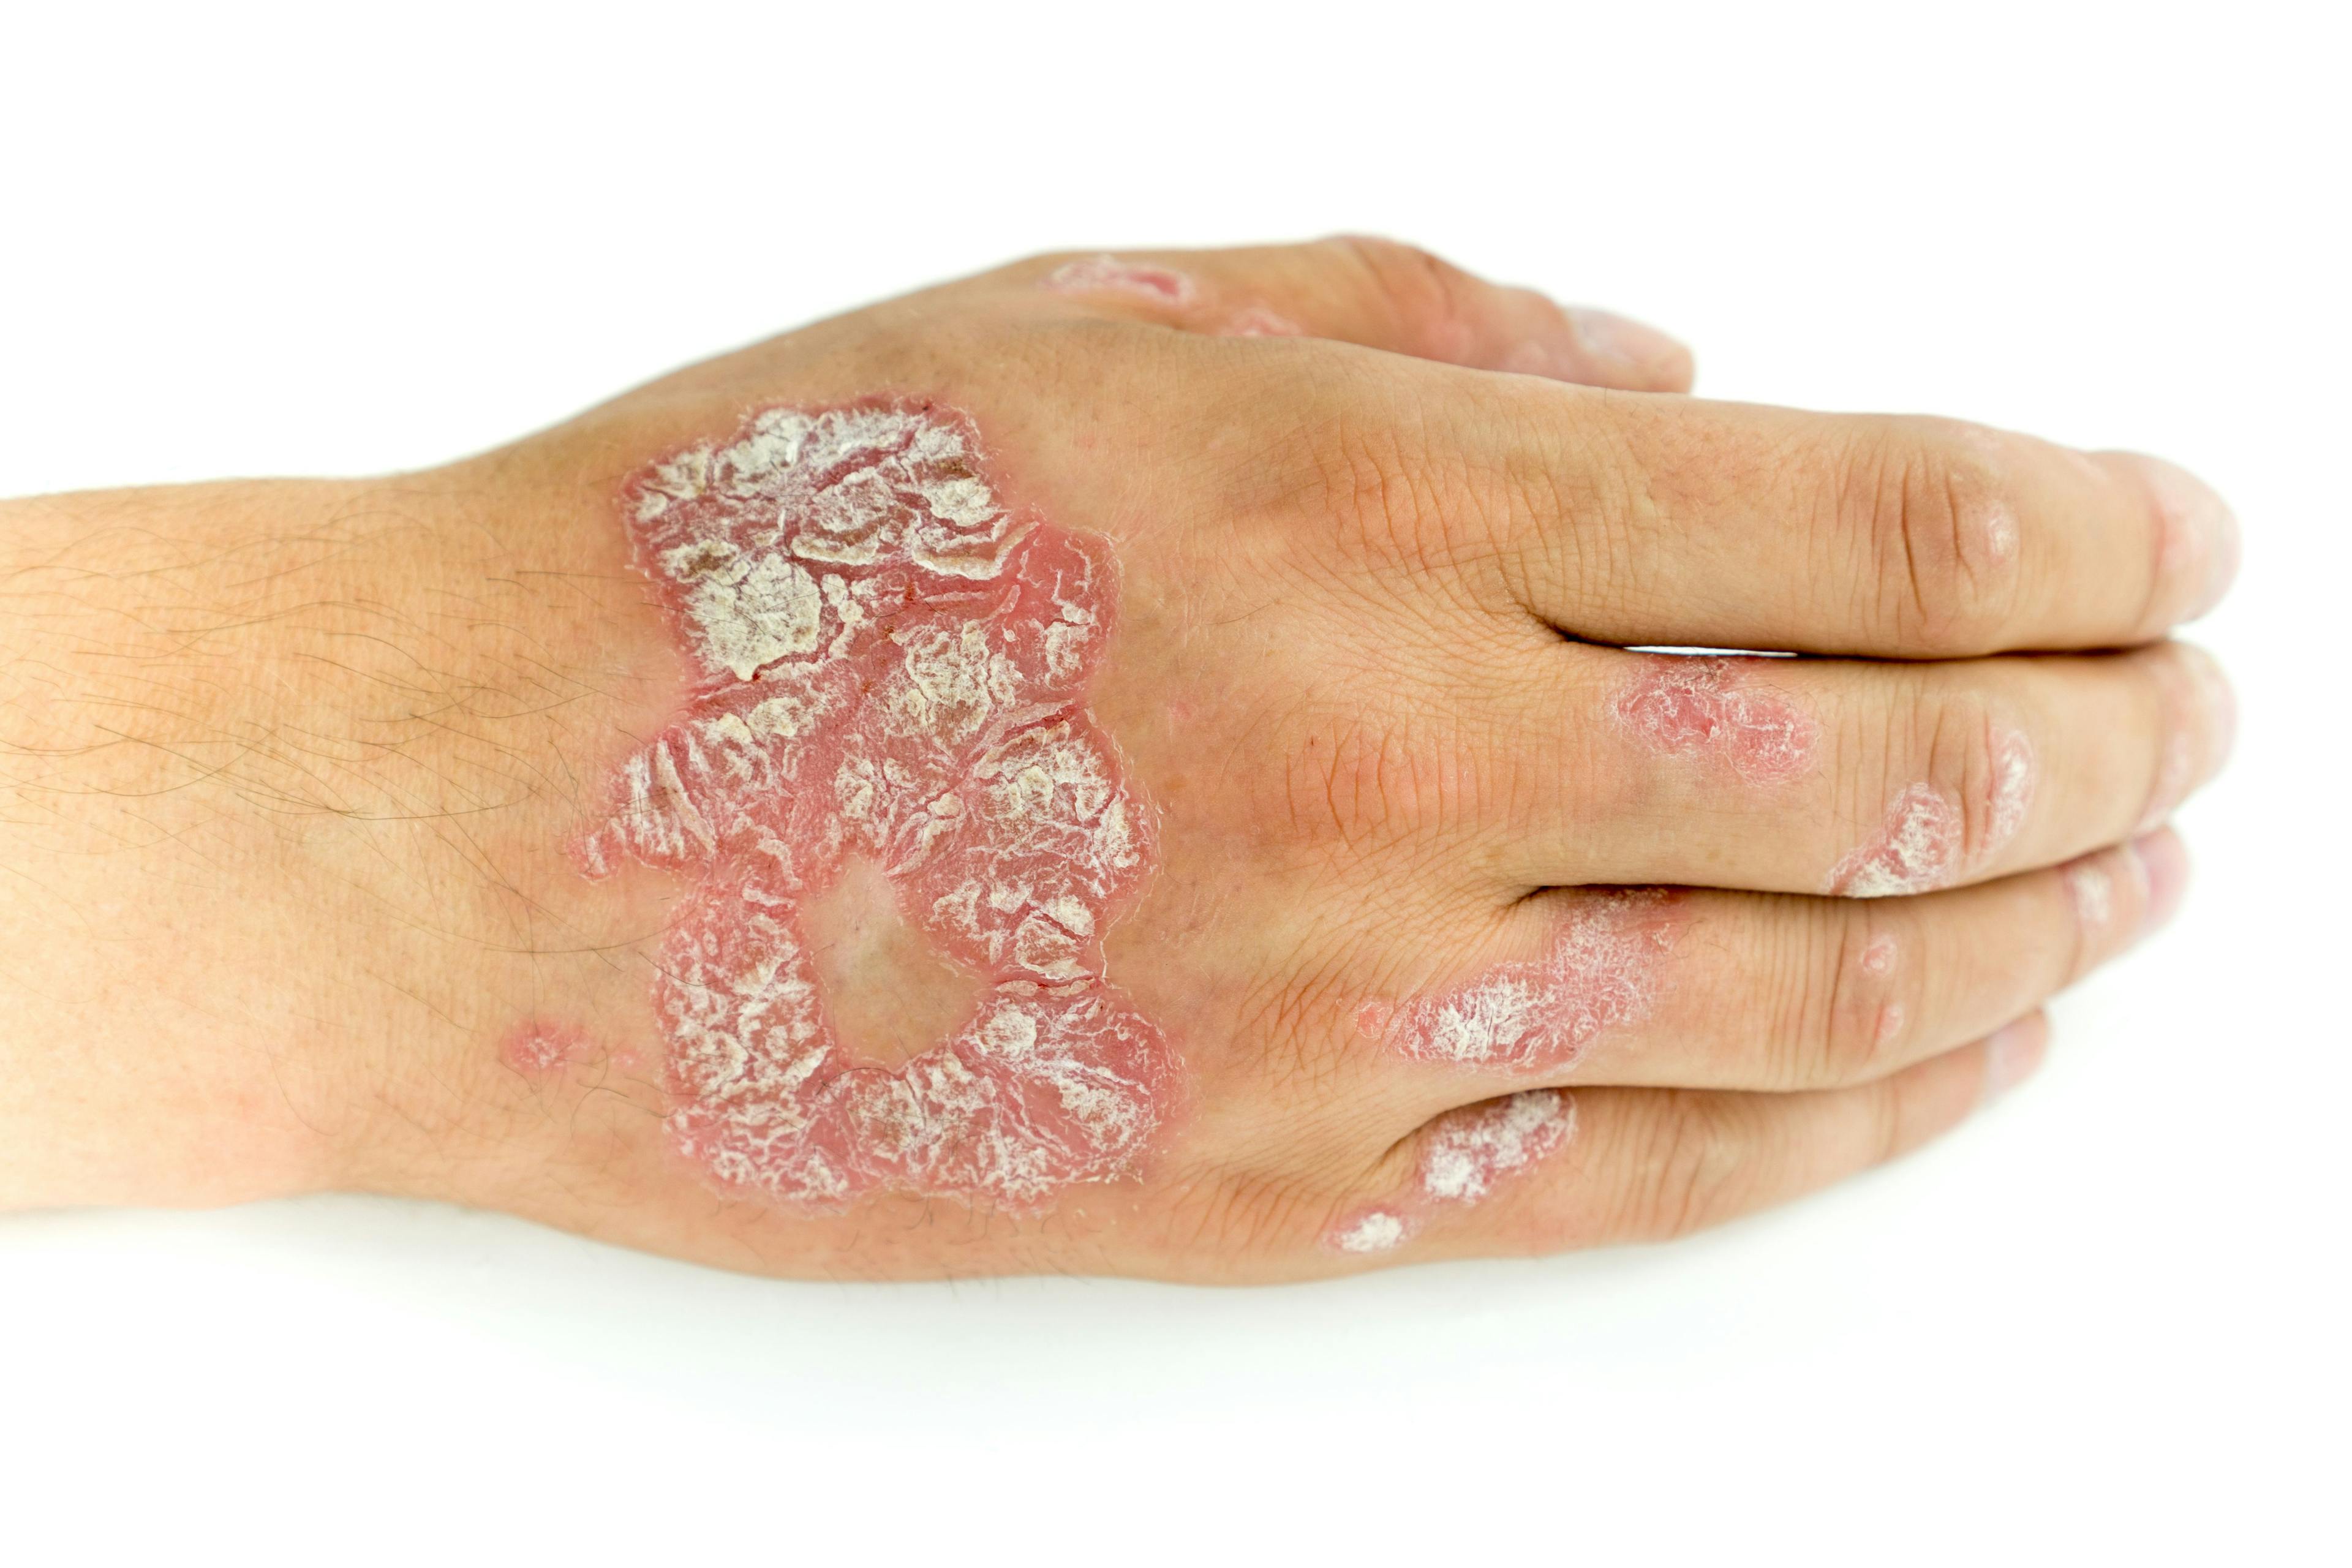 Tapinarof Cream 1% Led to Rapid Improvements in Itch for Adults With Mild to Severe Plaque Psoriasis